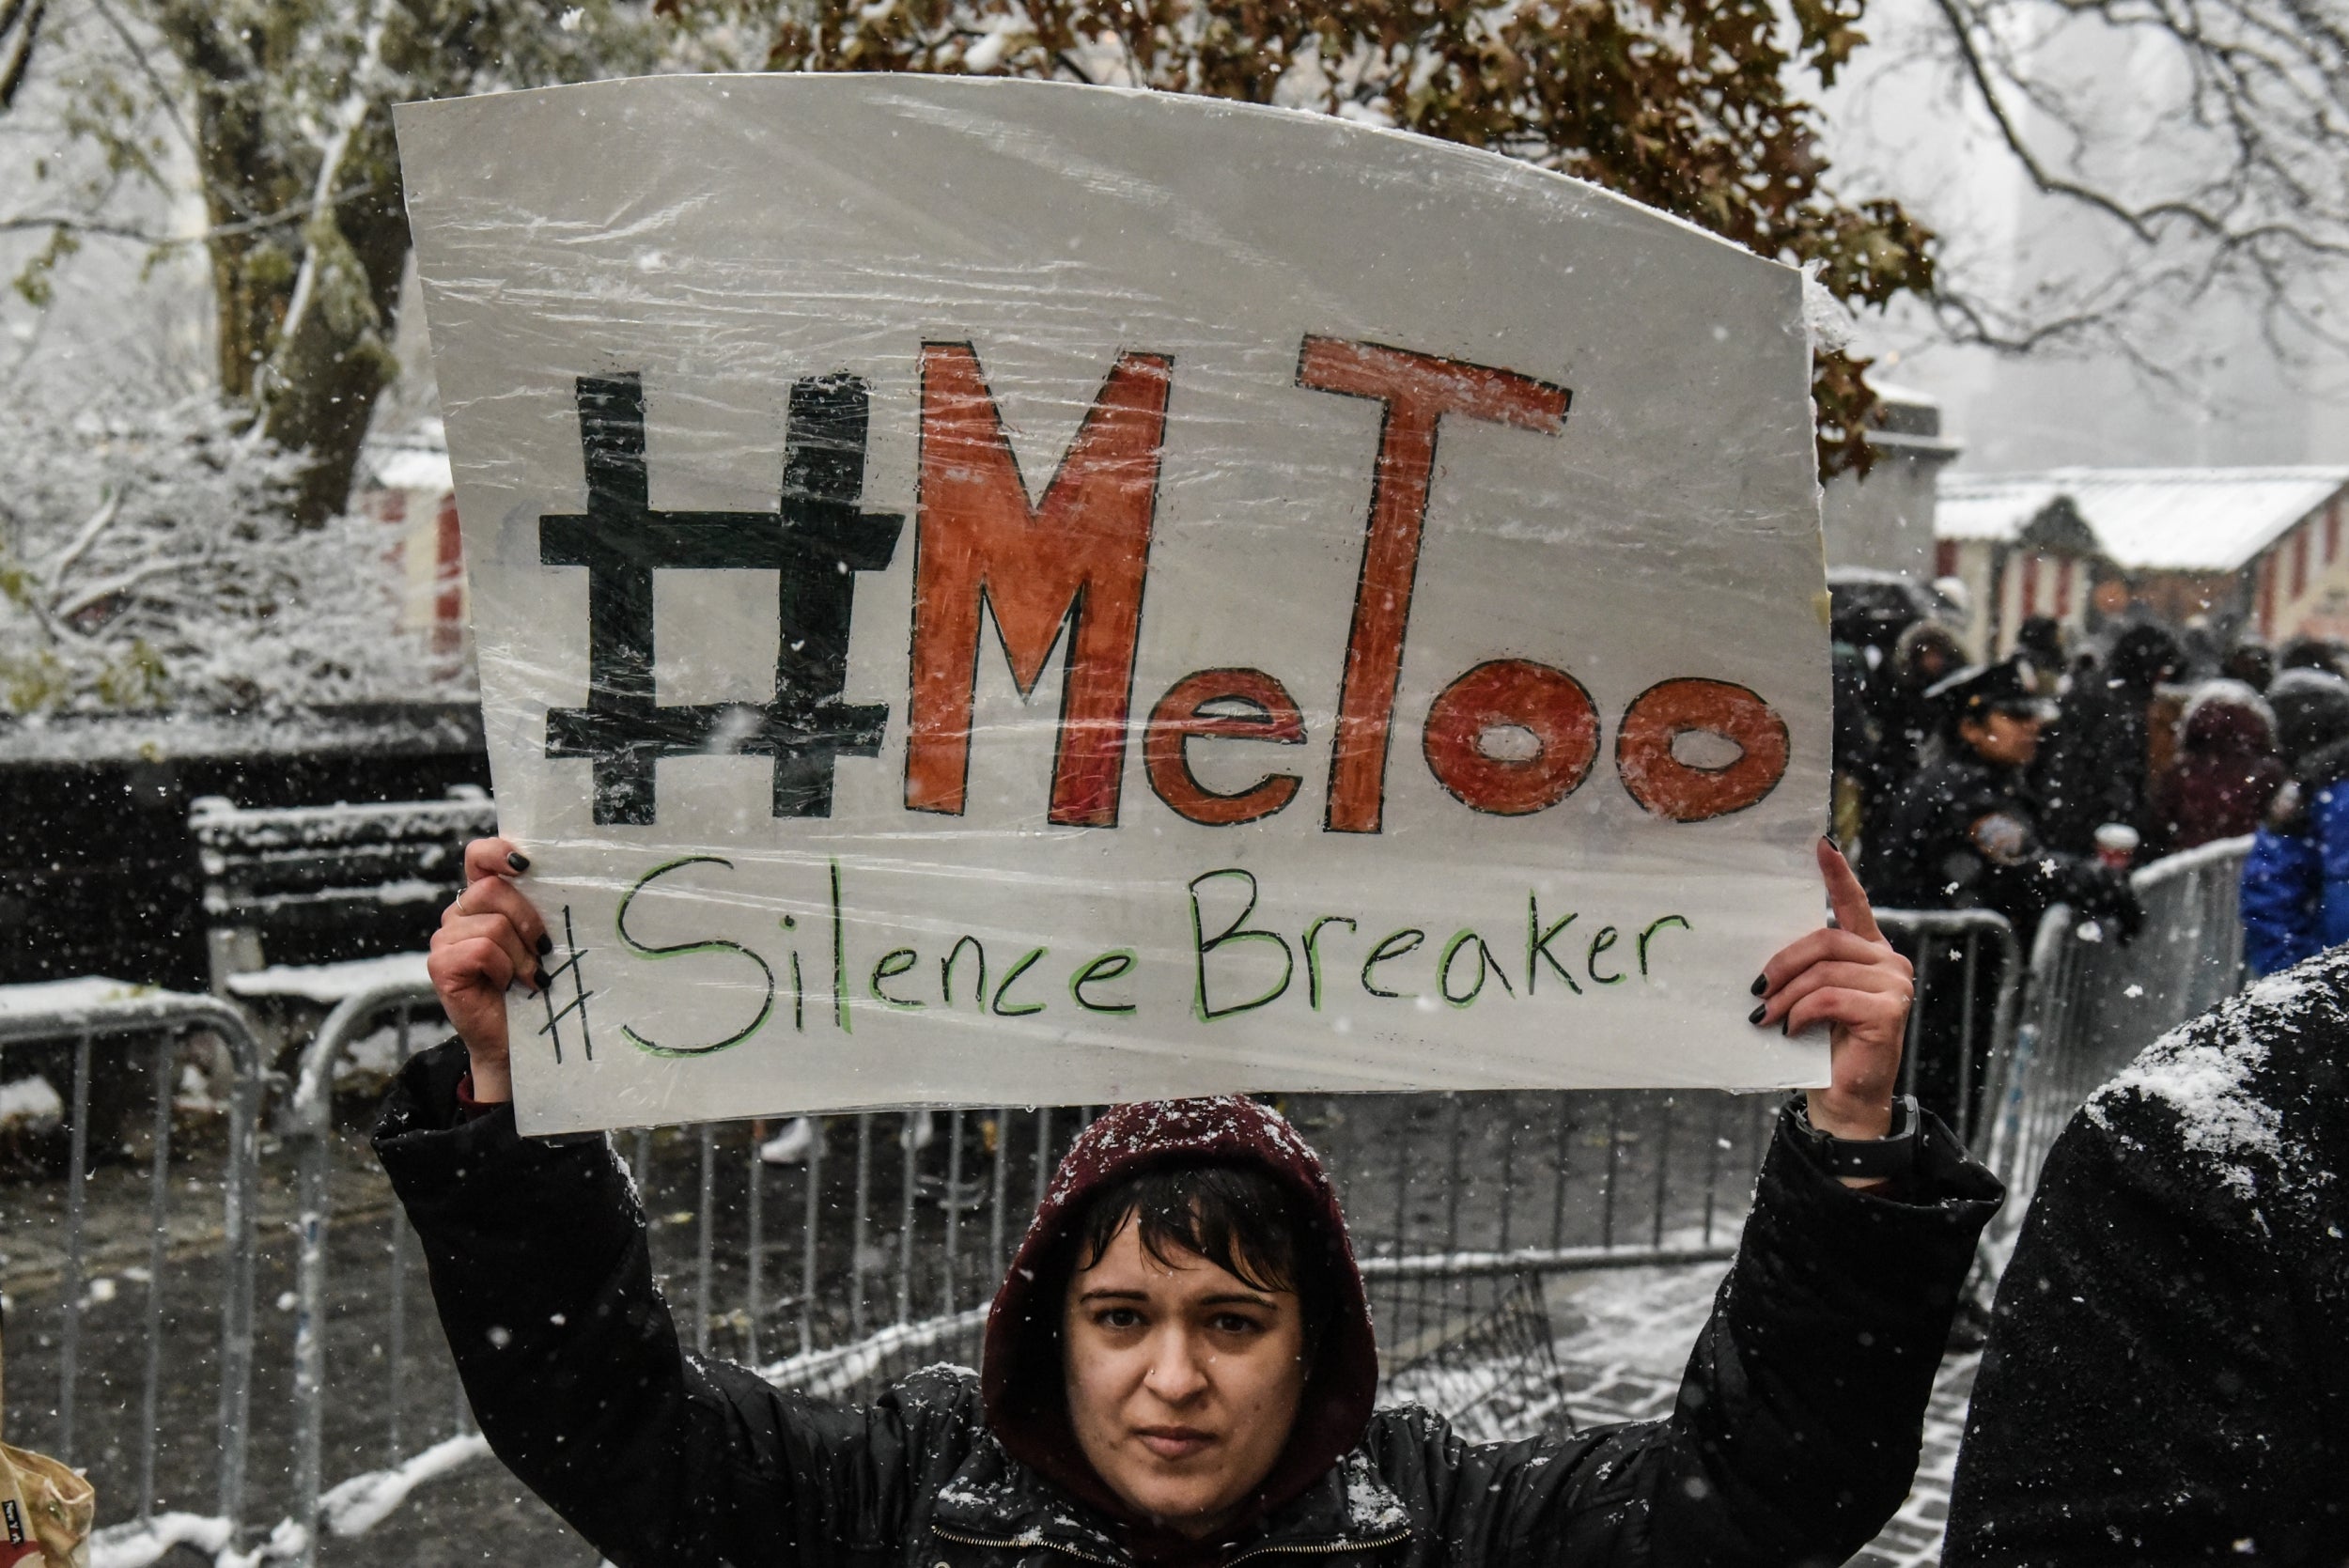 Men see sexual harassment as less of a problem than when #MeToo started, poll finds